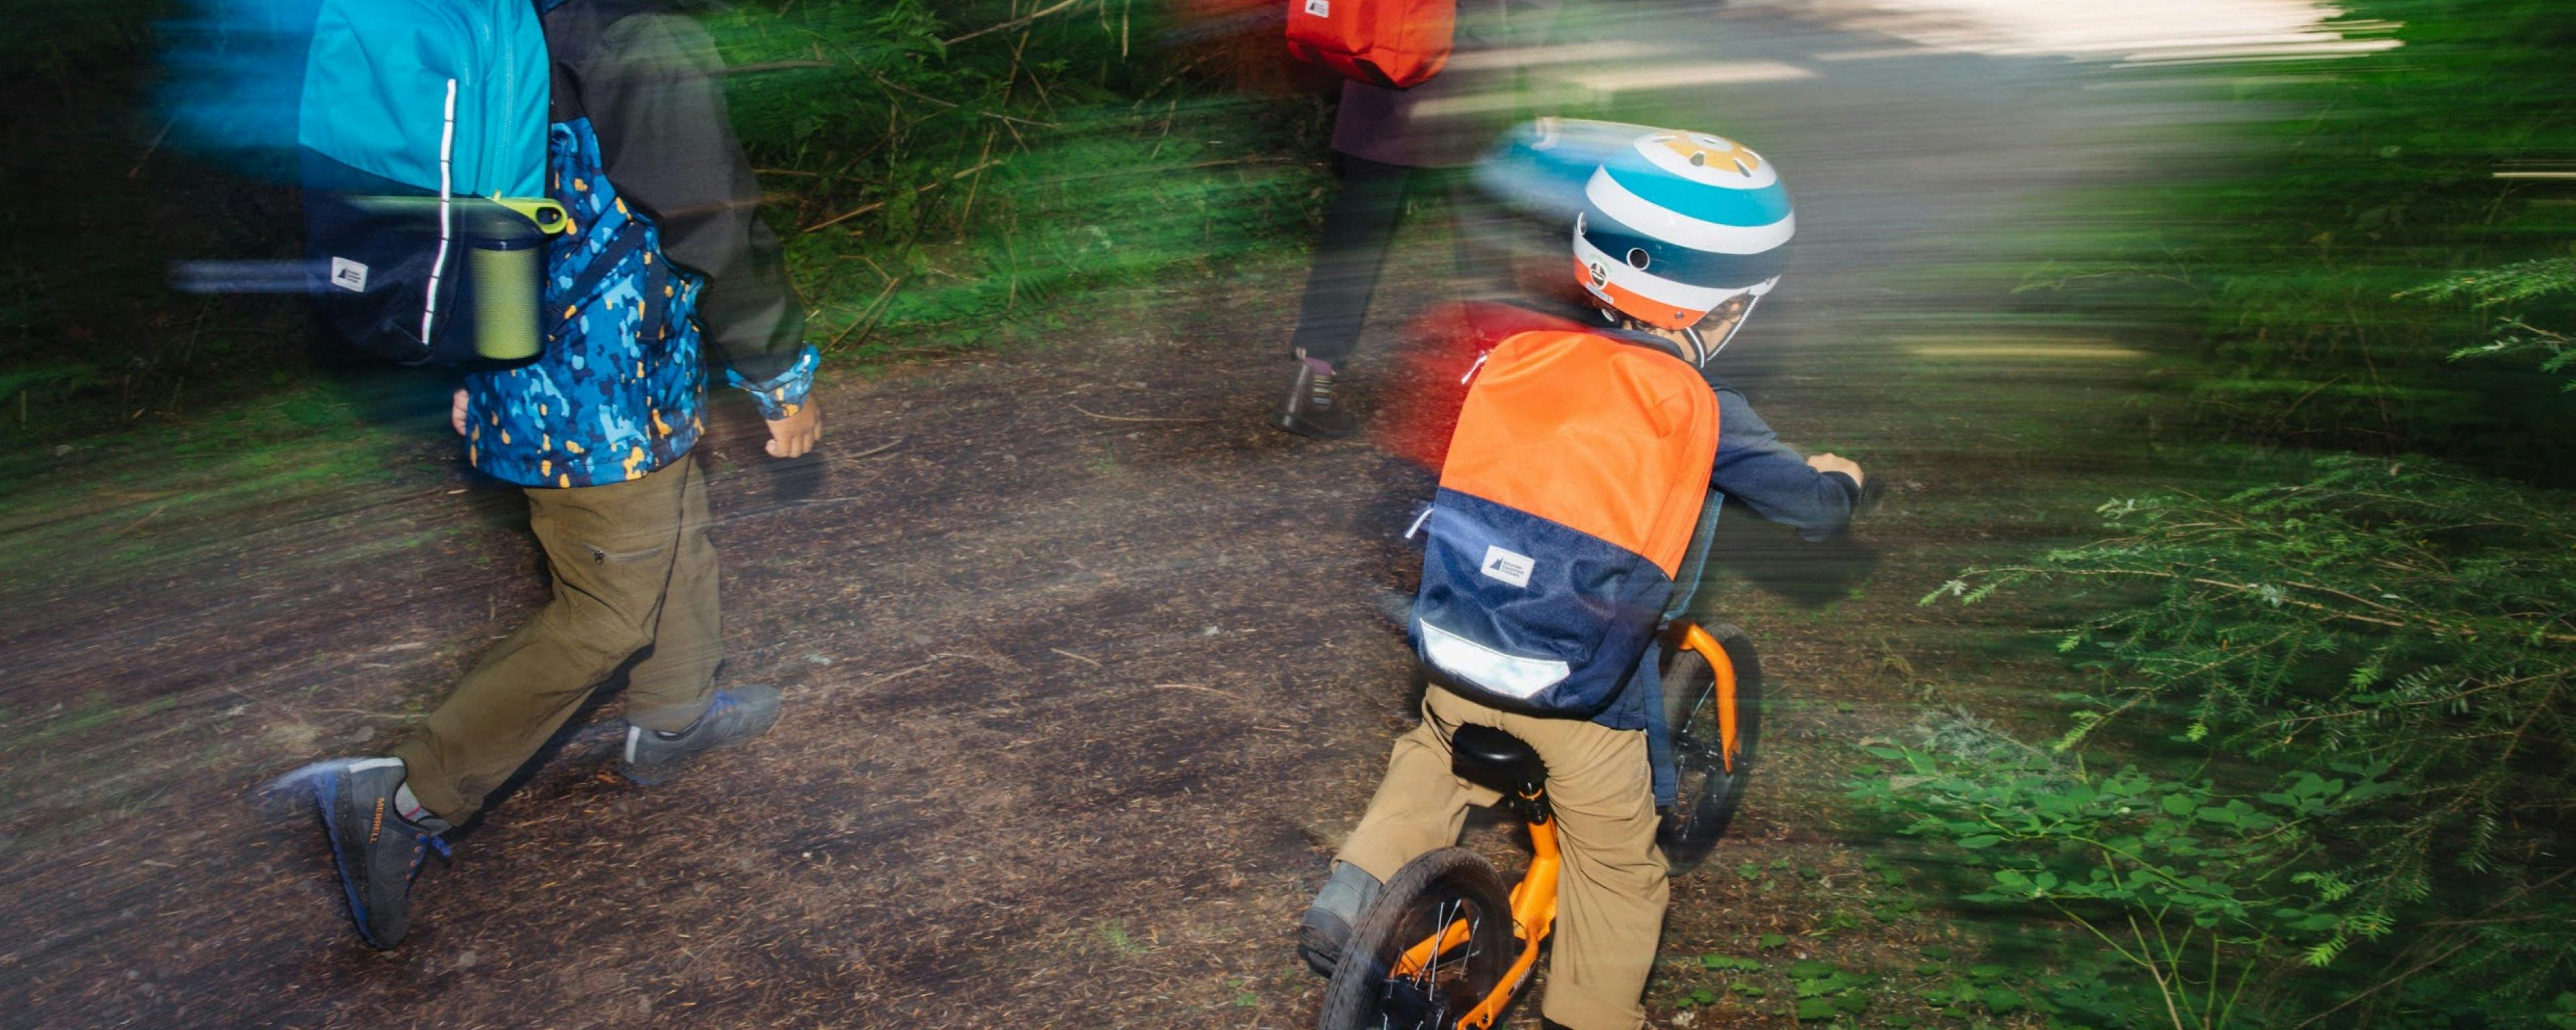 Child riding a push bike with a fun helmet on, and family members walking alongside